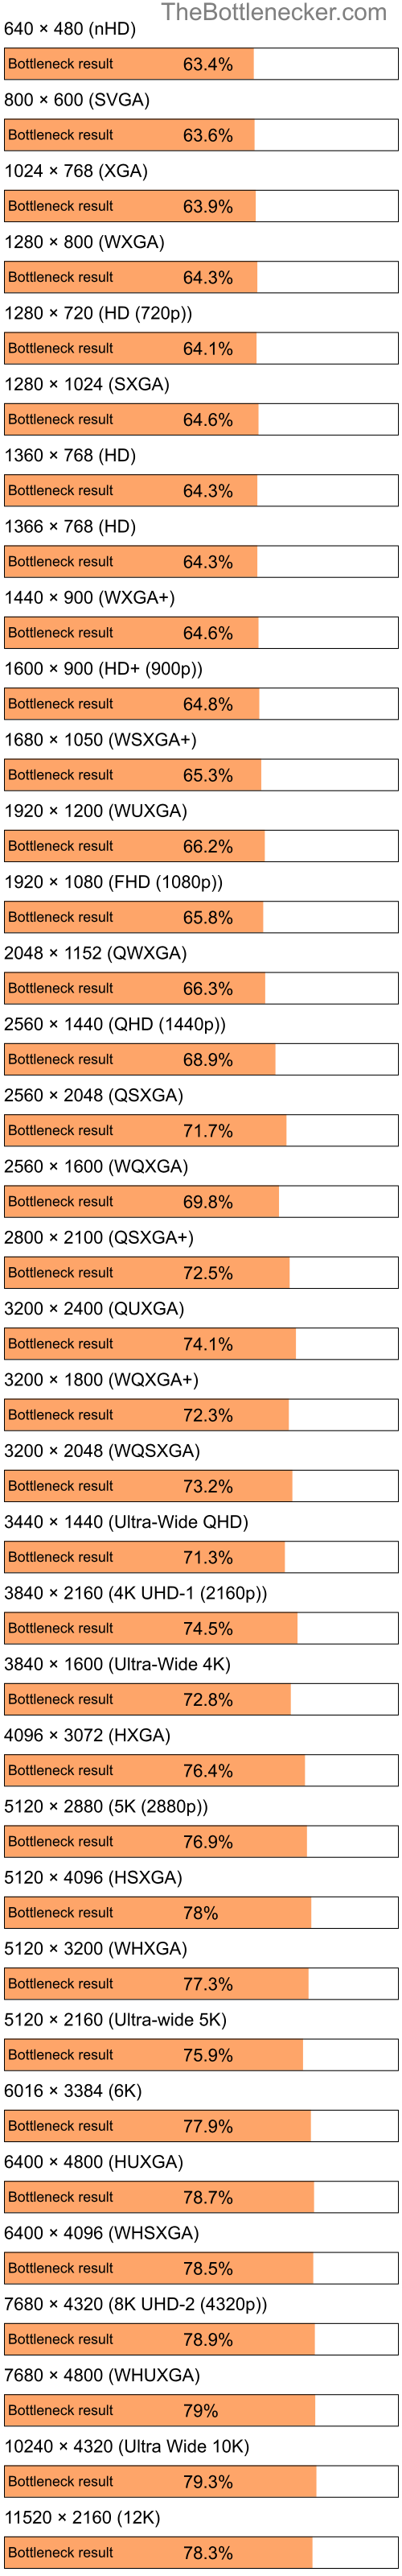 Bottleneck results by resolution for Intel Celeron M 420 and AMD Mobility Radeon HD 4200 in General Tasks